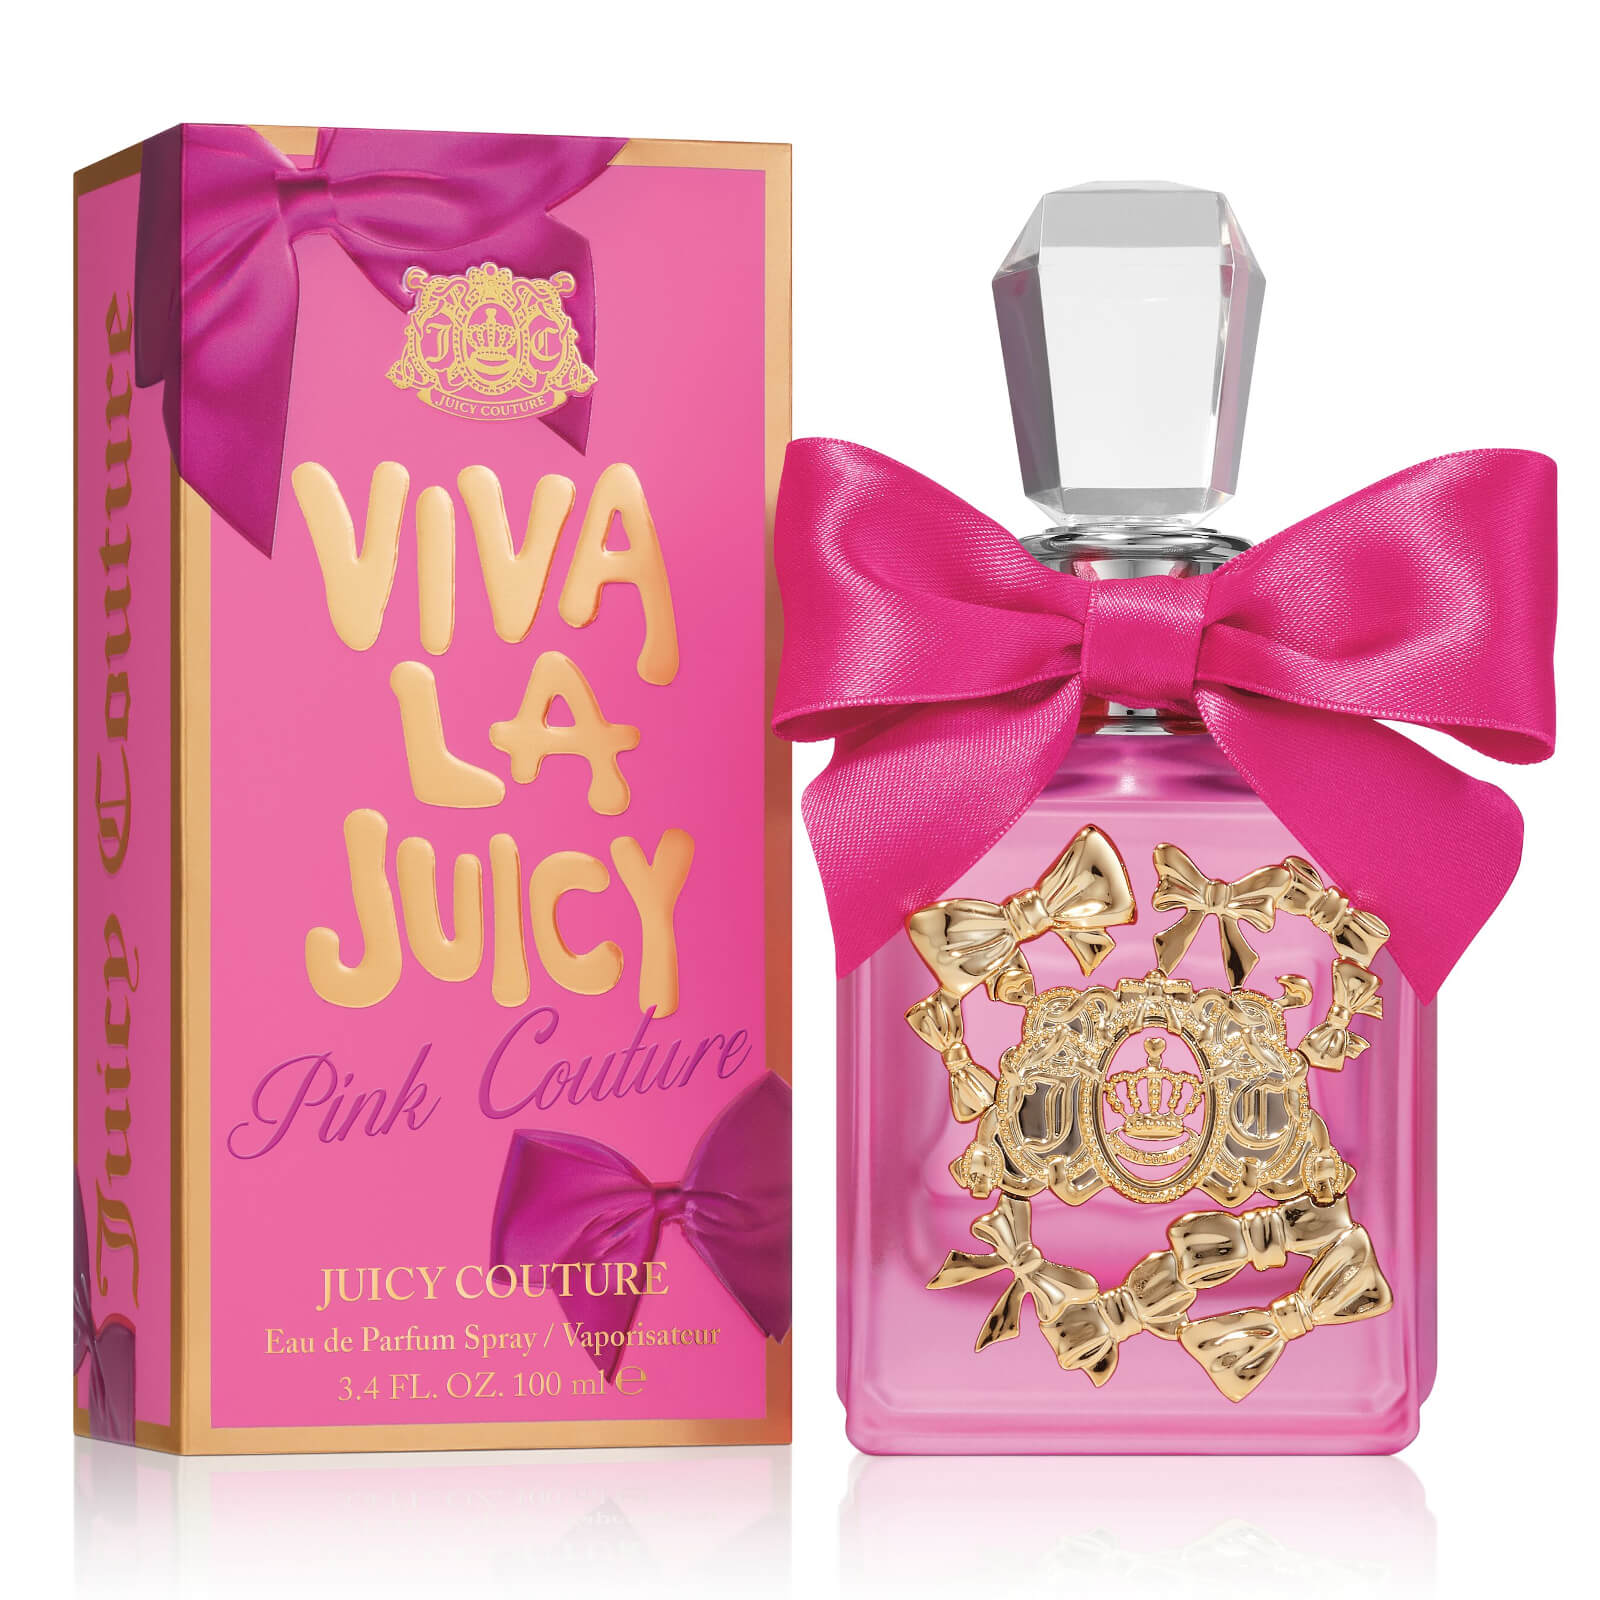 Couture туалетная вода. Juicy Couture Viva la juicy Pink Couture. Вива ла Джуси Кутюр духи. Juicy Couture духи Viva la. Духи juicy Couture Viva la juicy.